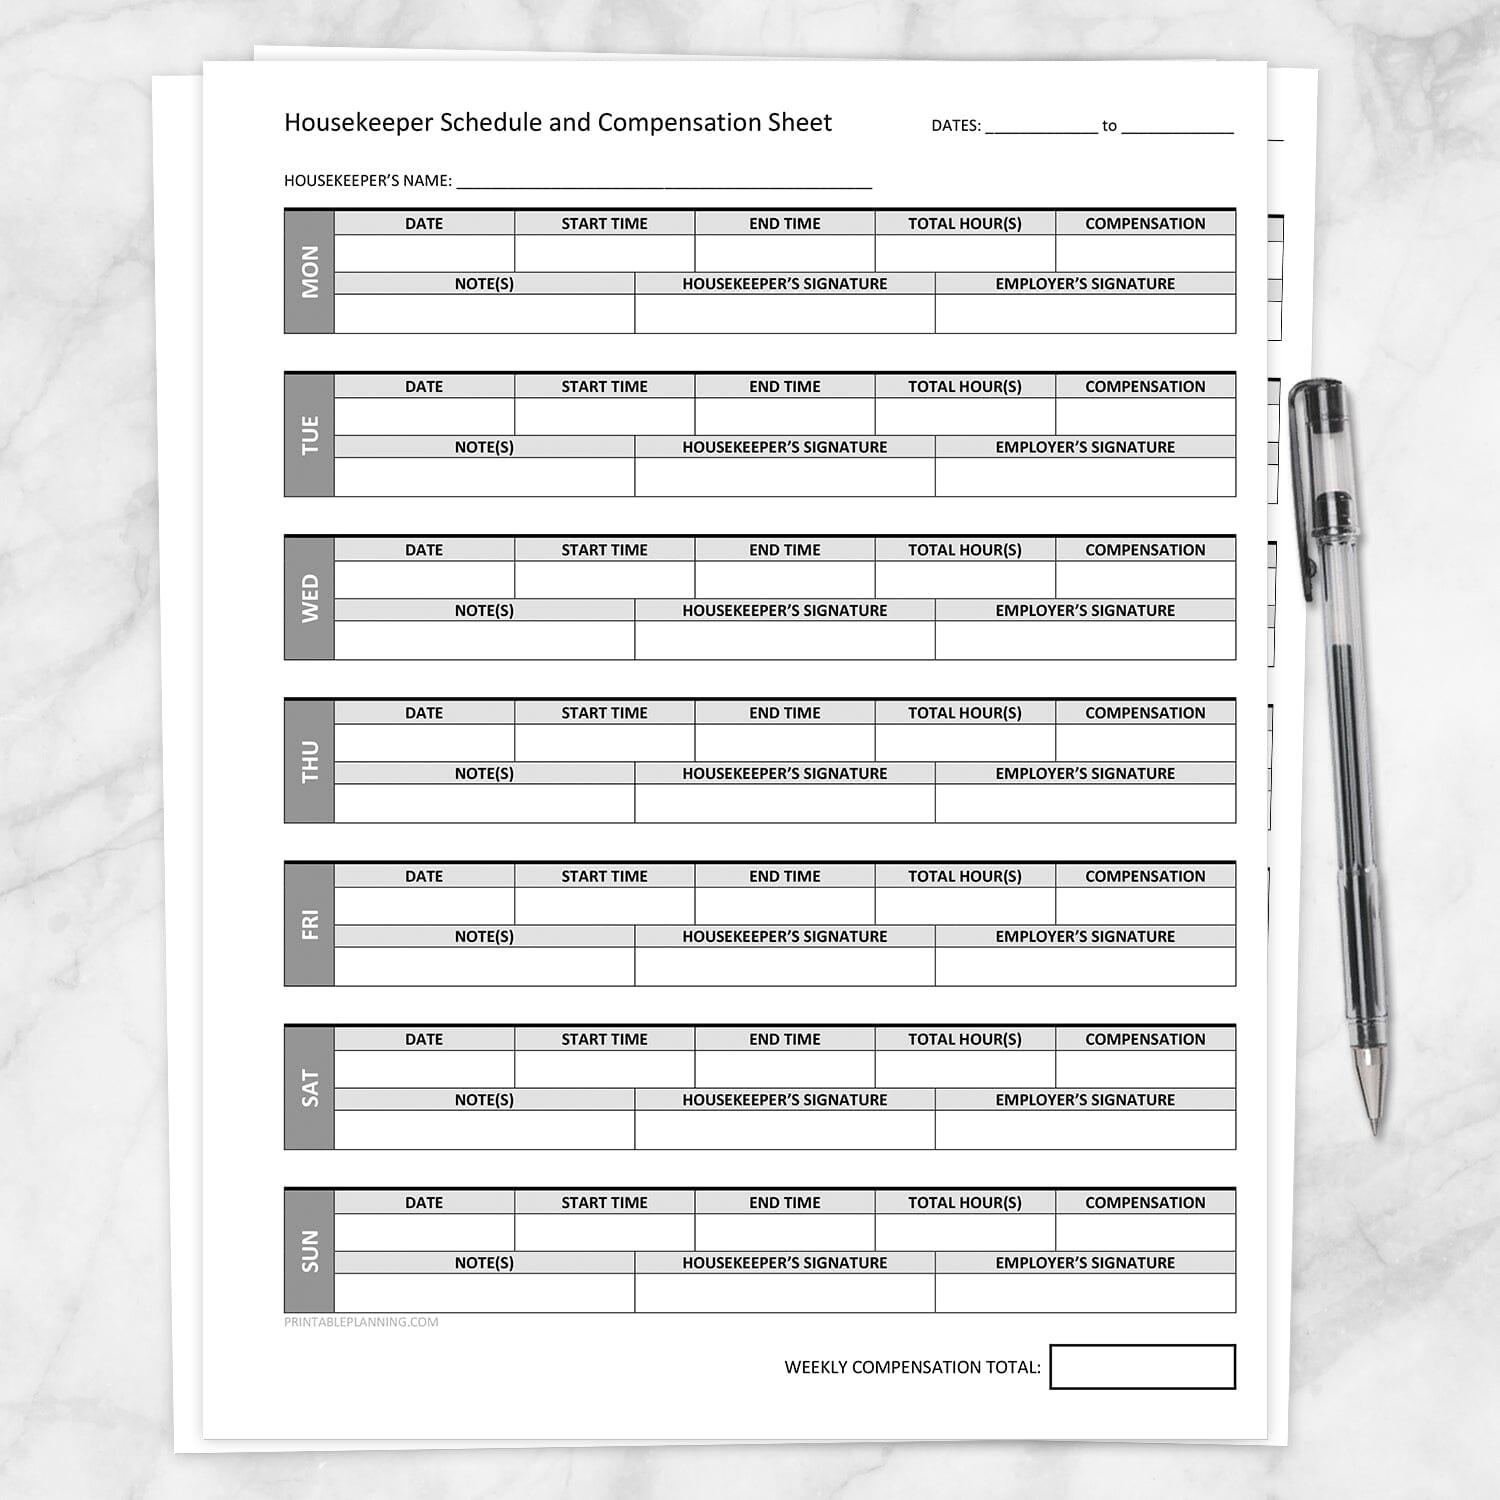 Printable Housekeeper Schedule and Compensation Sheet at Printable Planning